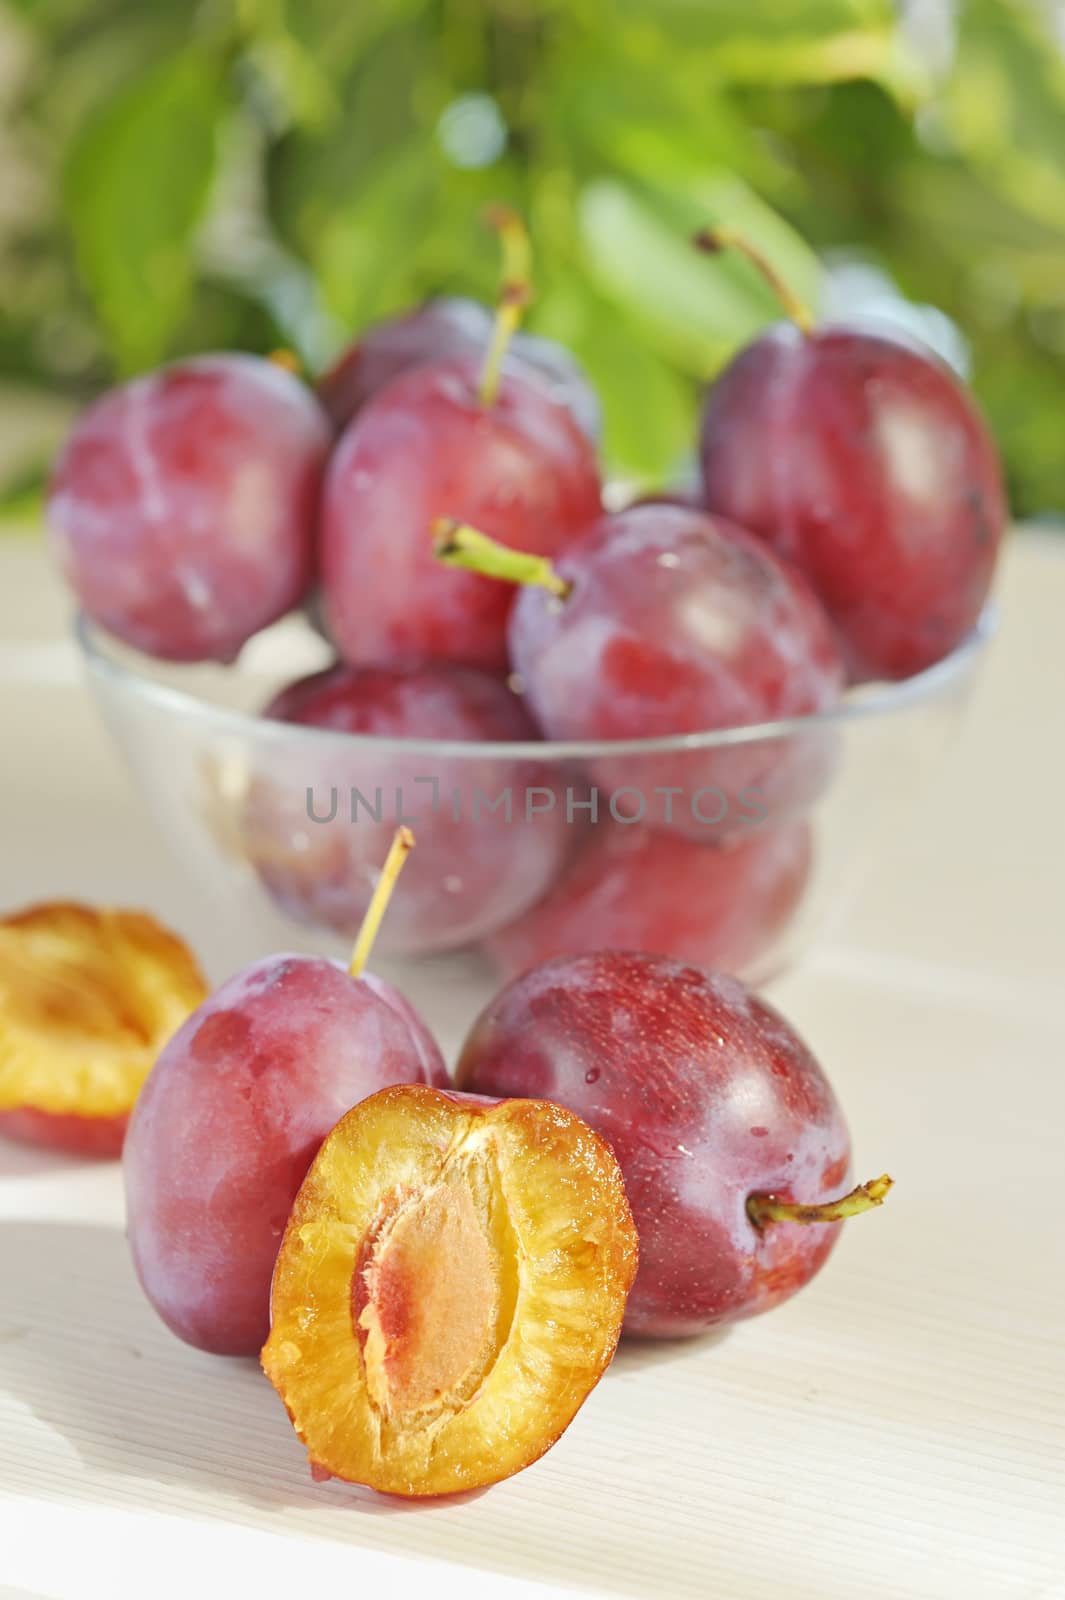 Fresh plums by mady70